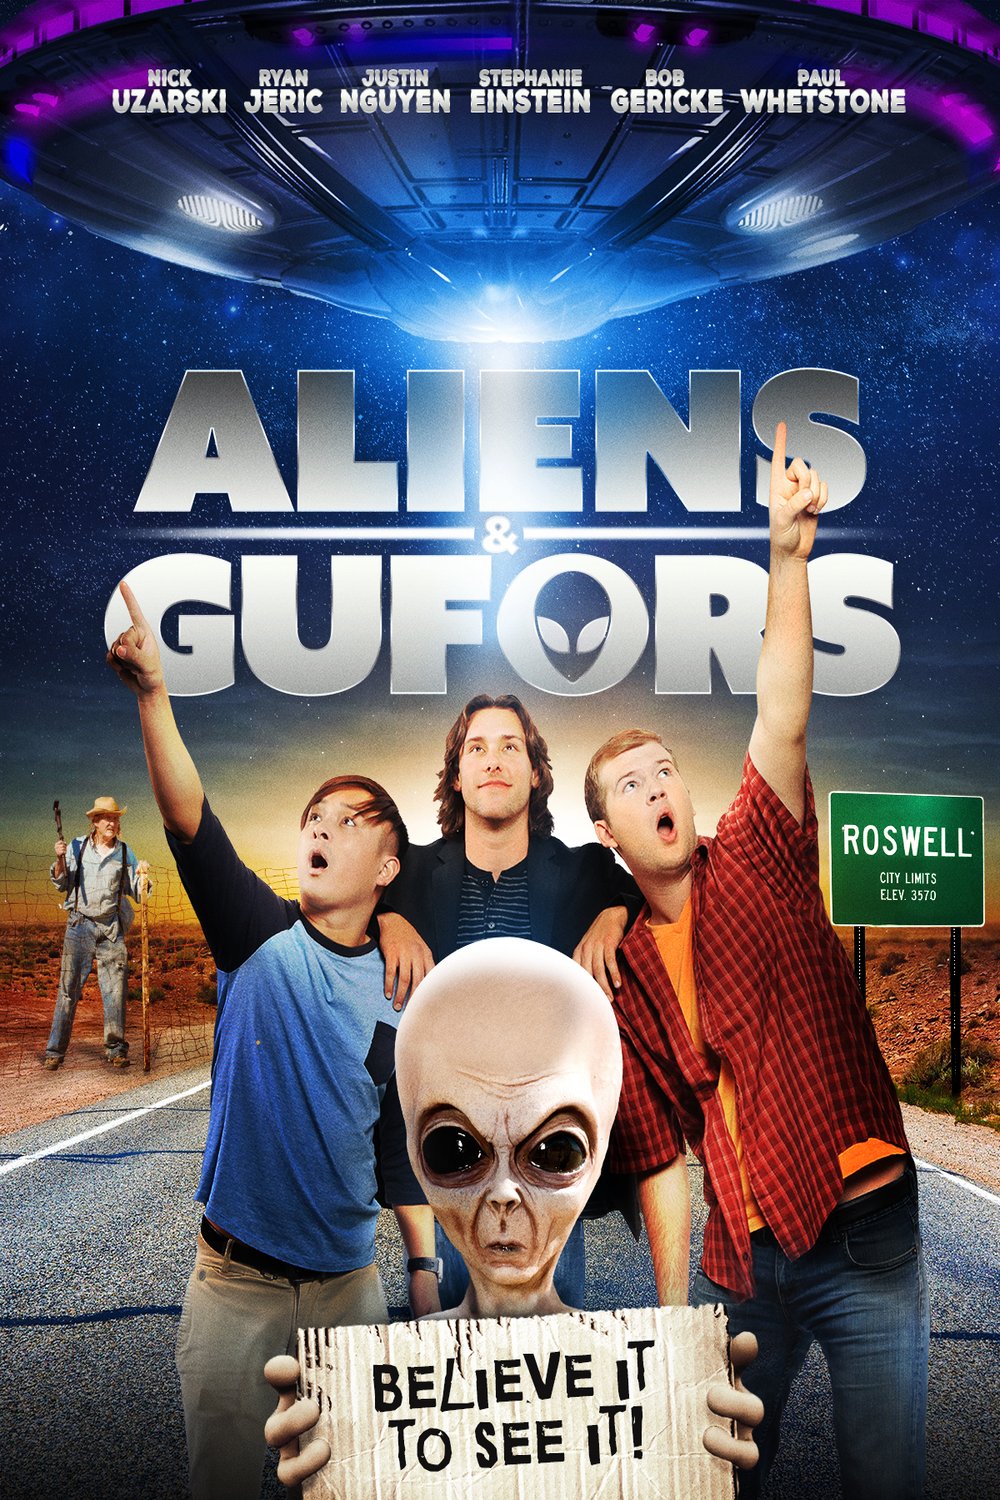 Poster of the movie Aliens and Gufors